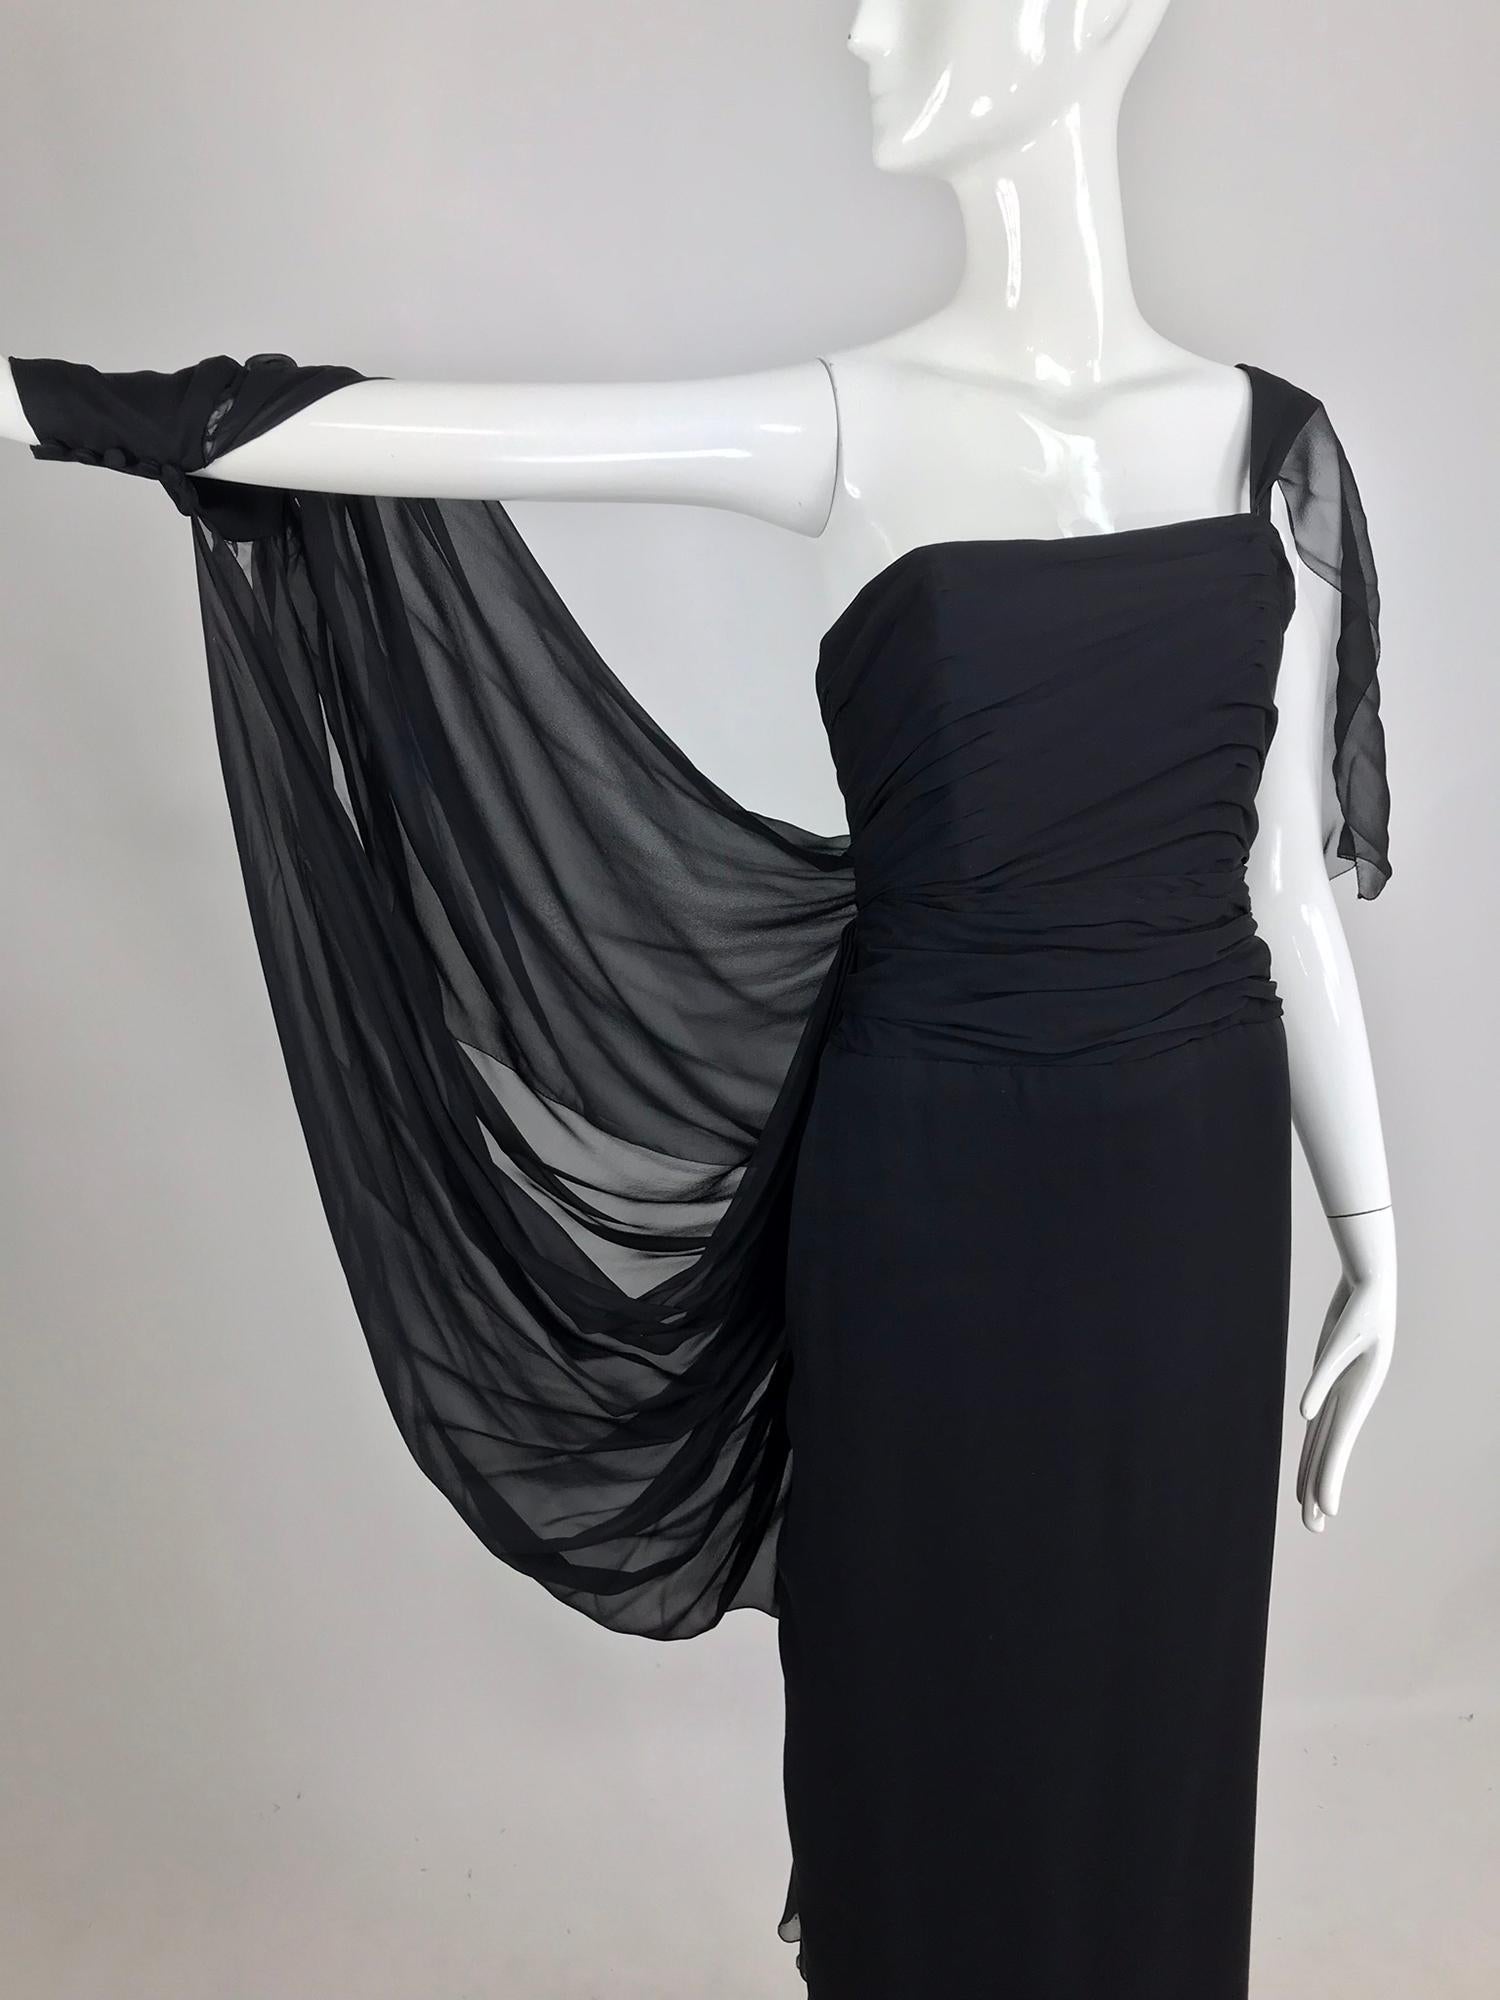 Paul-Louis Orrier black silk chiffon one sleeve demi couture gown from the early 1980s.  Orrier may be better known for his 80s poof and glitter confections, but this dress done in silk chiffon shows command of a notoriously difficult to work with